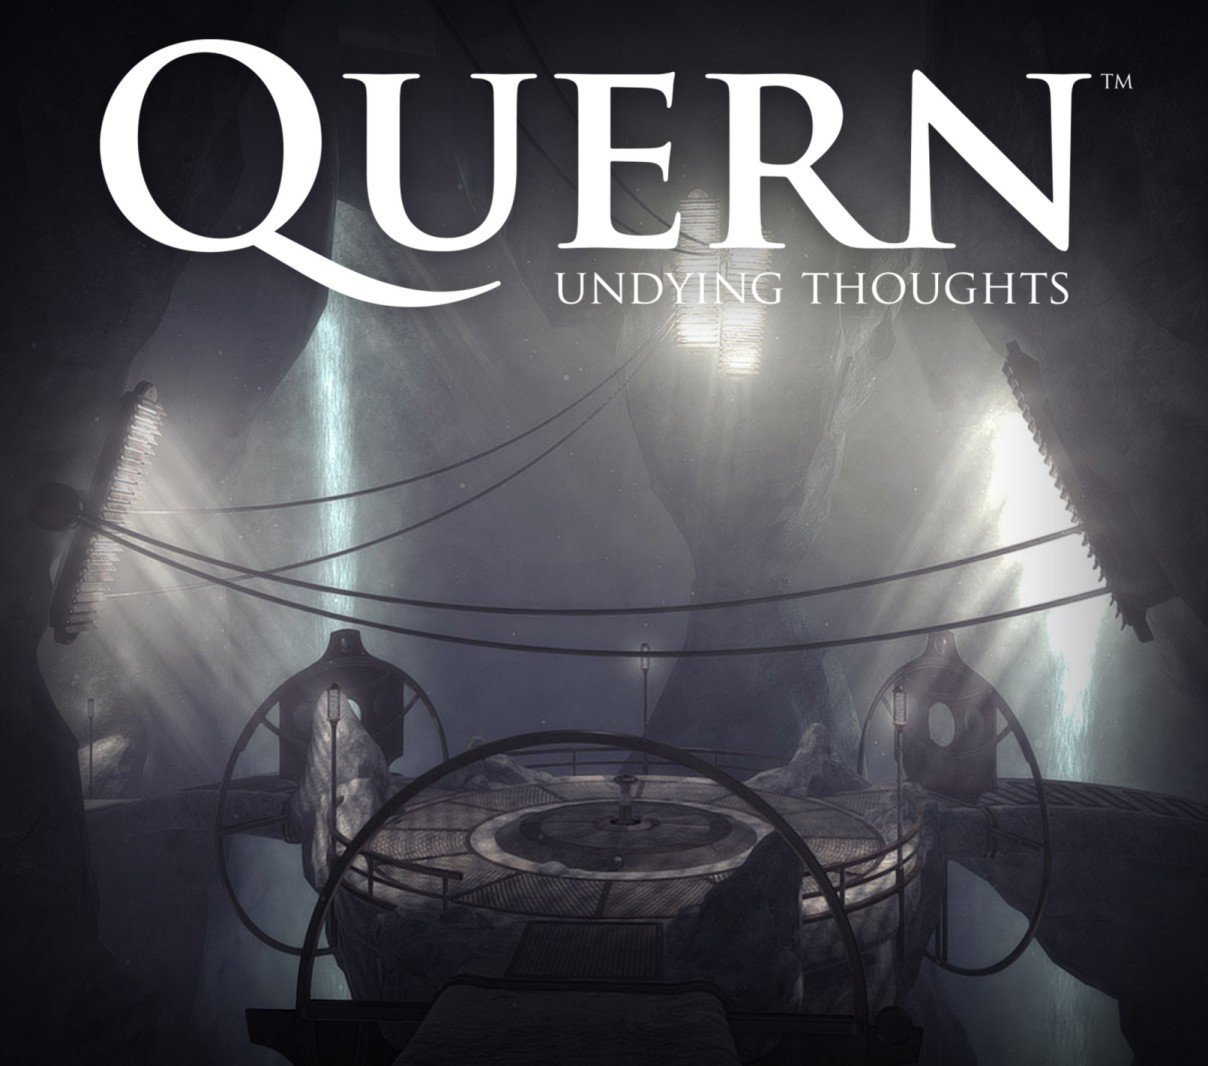 download steam quern for free